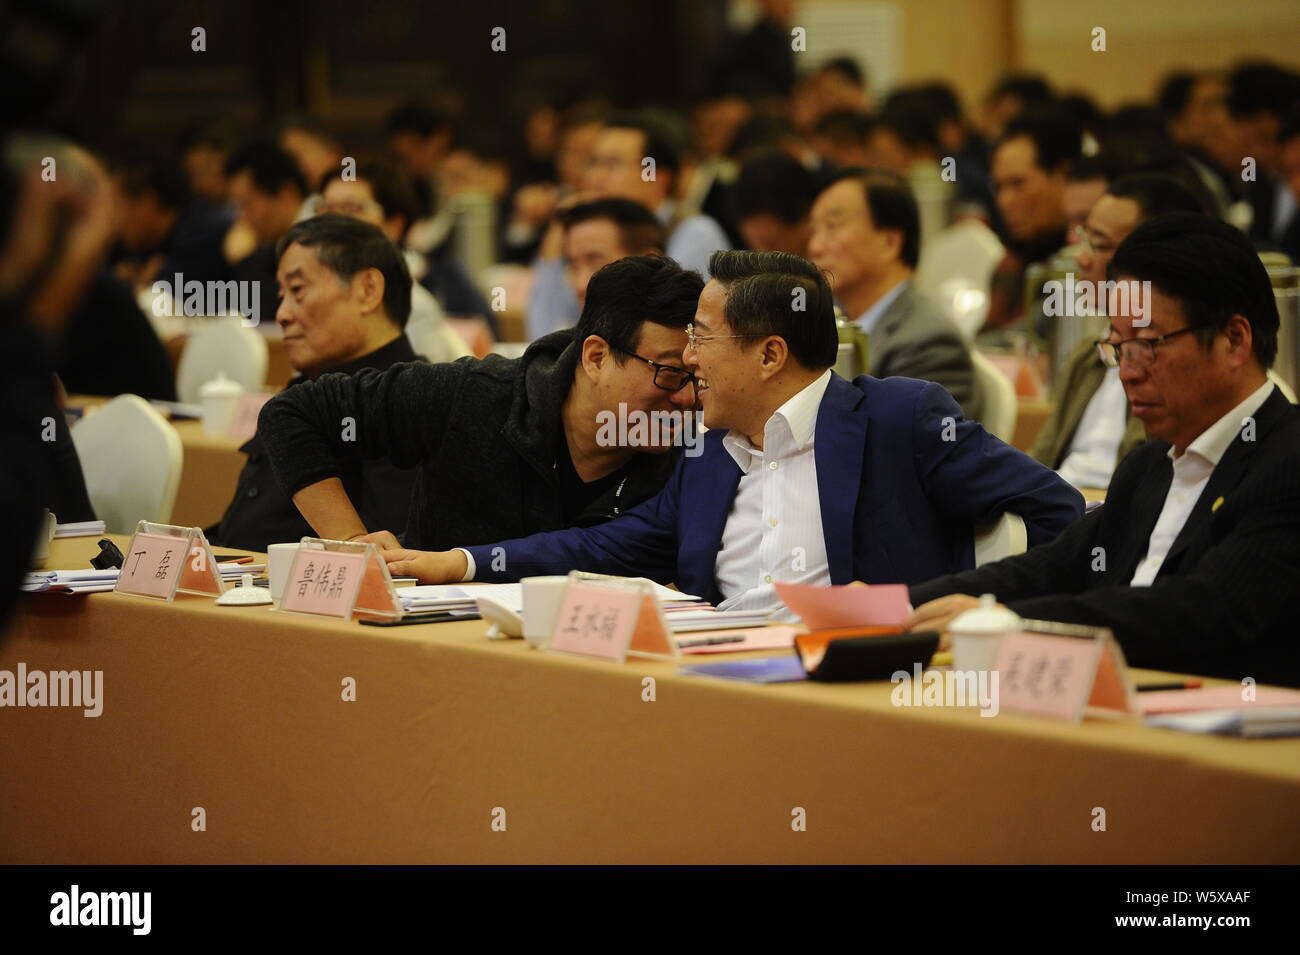 William Ding or Ding Lei, left, CEO of Netease (163.com), talks with Lu Weiding, Chief Executive Officer and President of Wanxiang Group, during the H Stock Photo